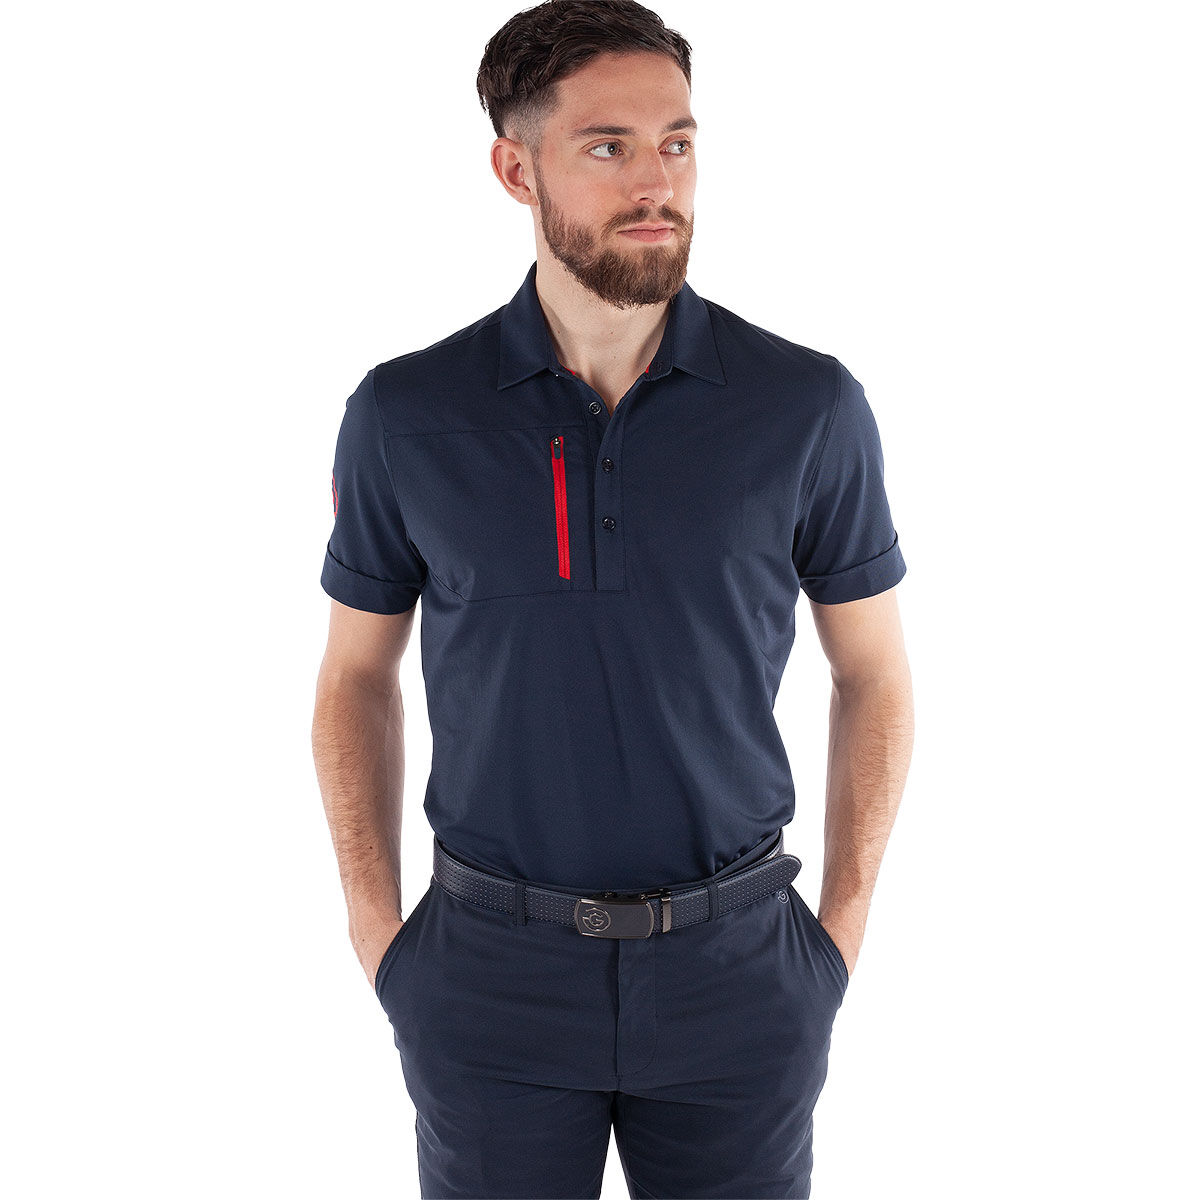 Galvin Green Mens Navy Blue and Red Comfortable Morton Golf Polo Shirt, Size: Small | American Golf